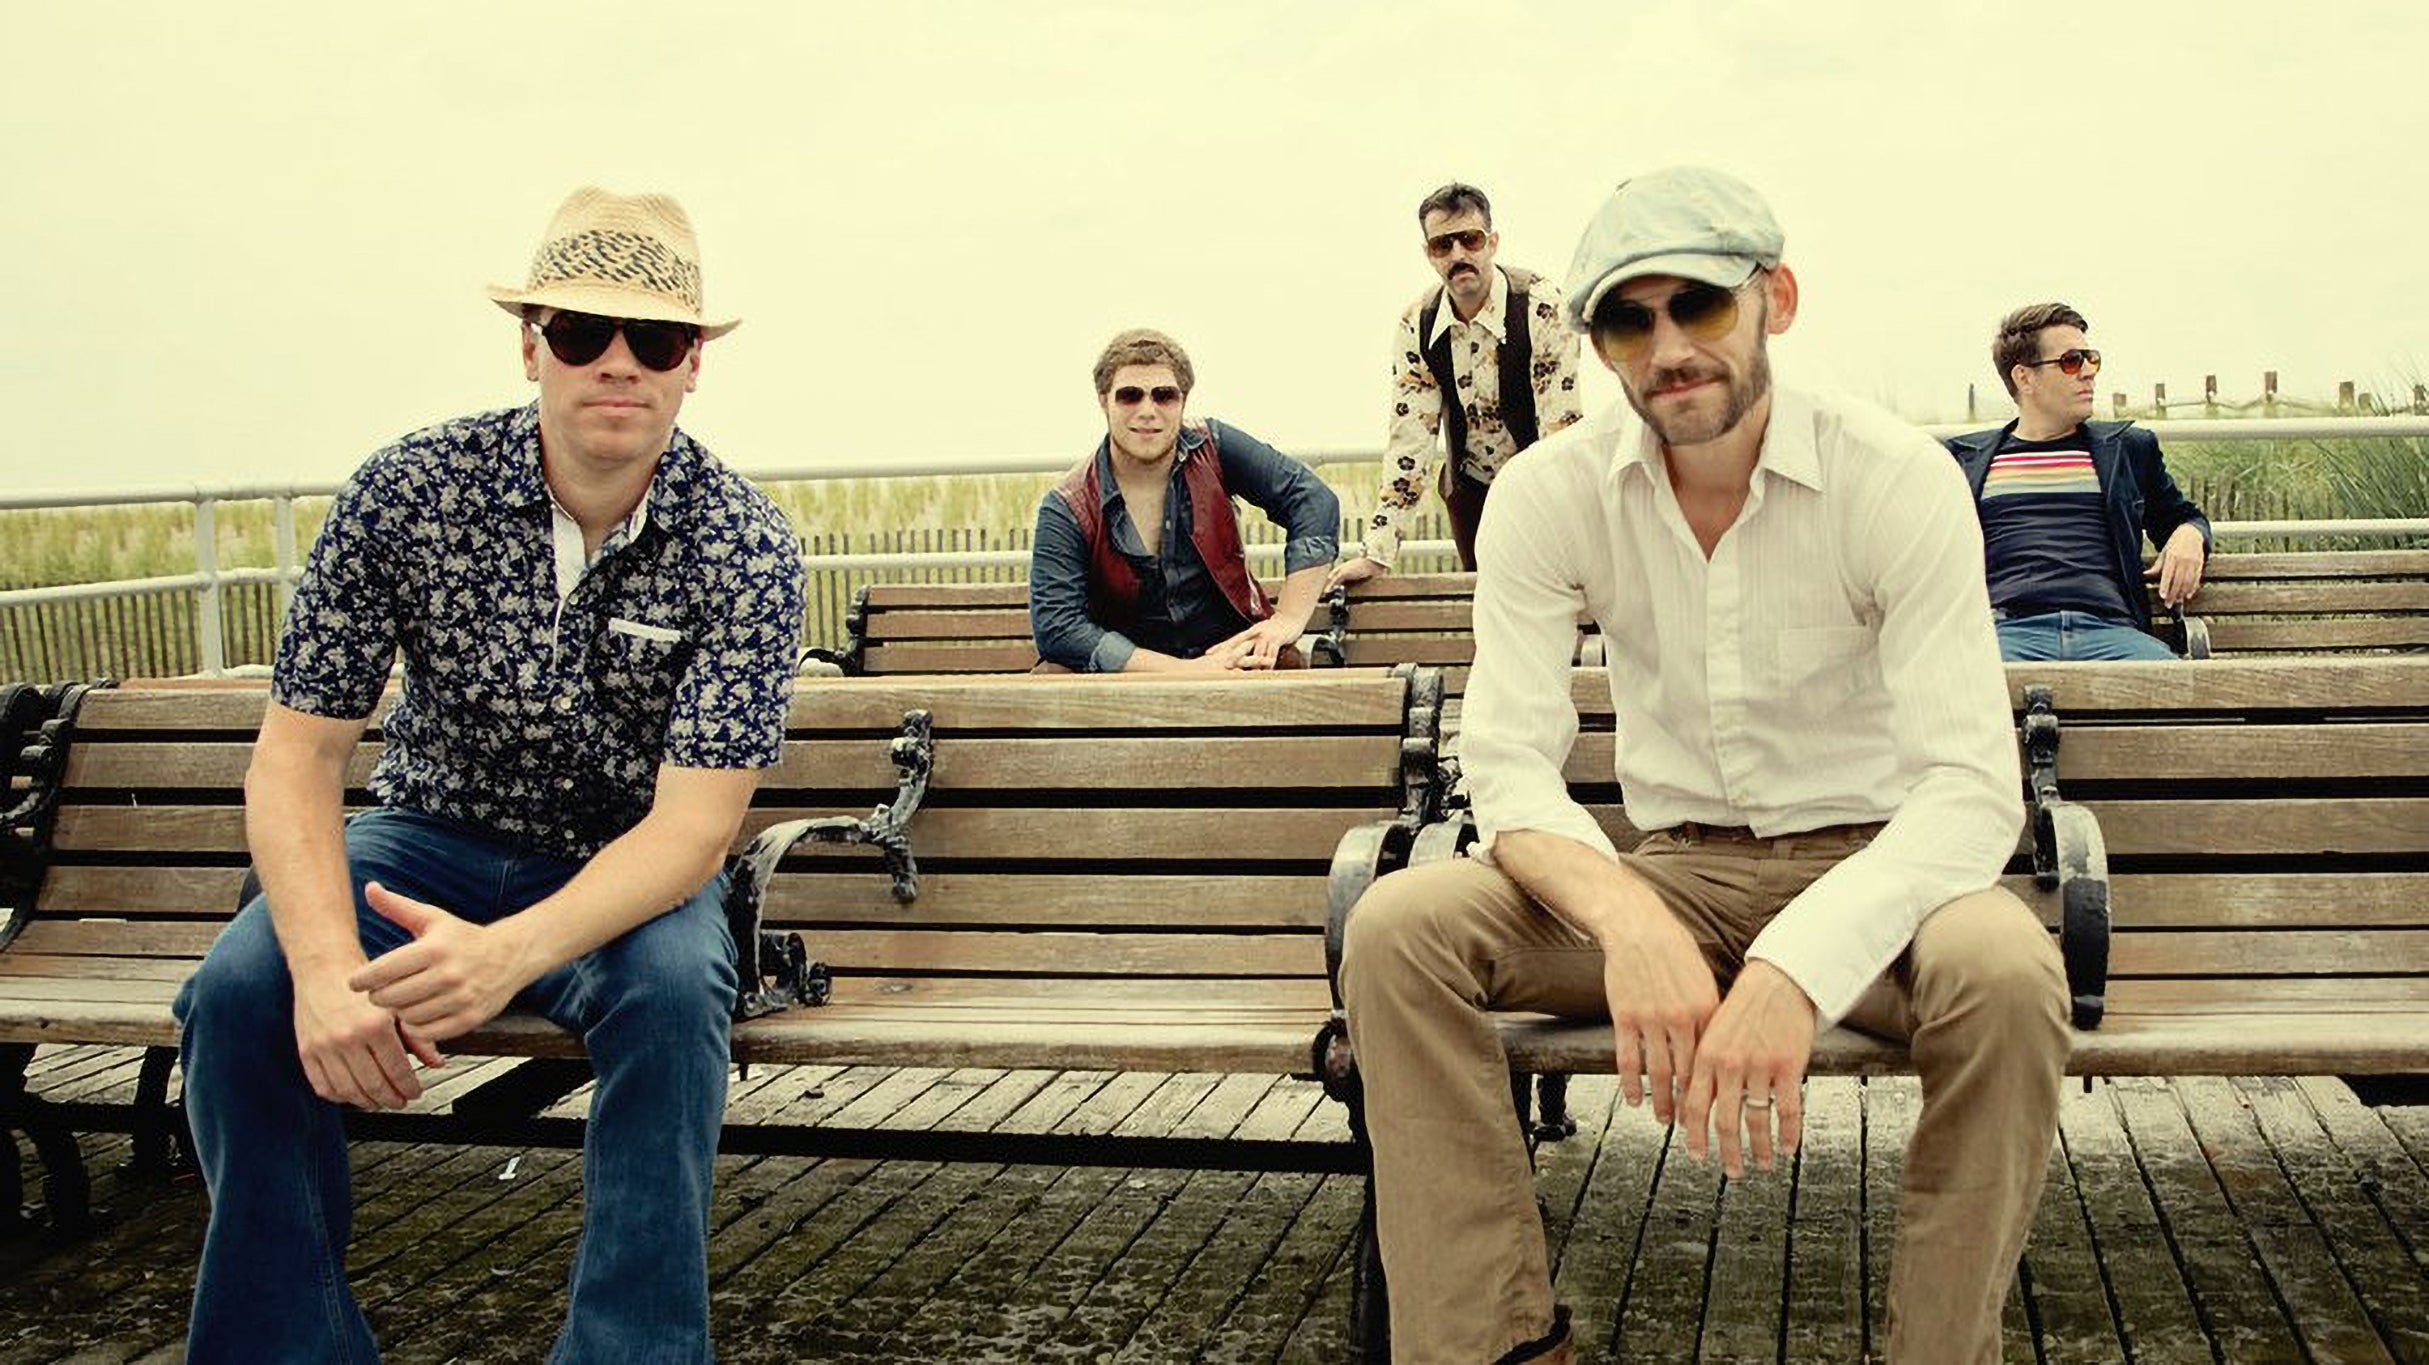 Yacht Rock Night with Boat House Row! in Leesburg promo photo for Cyber Monday presale offer code